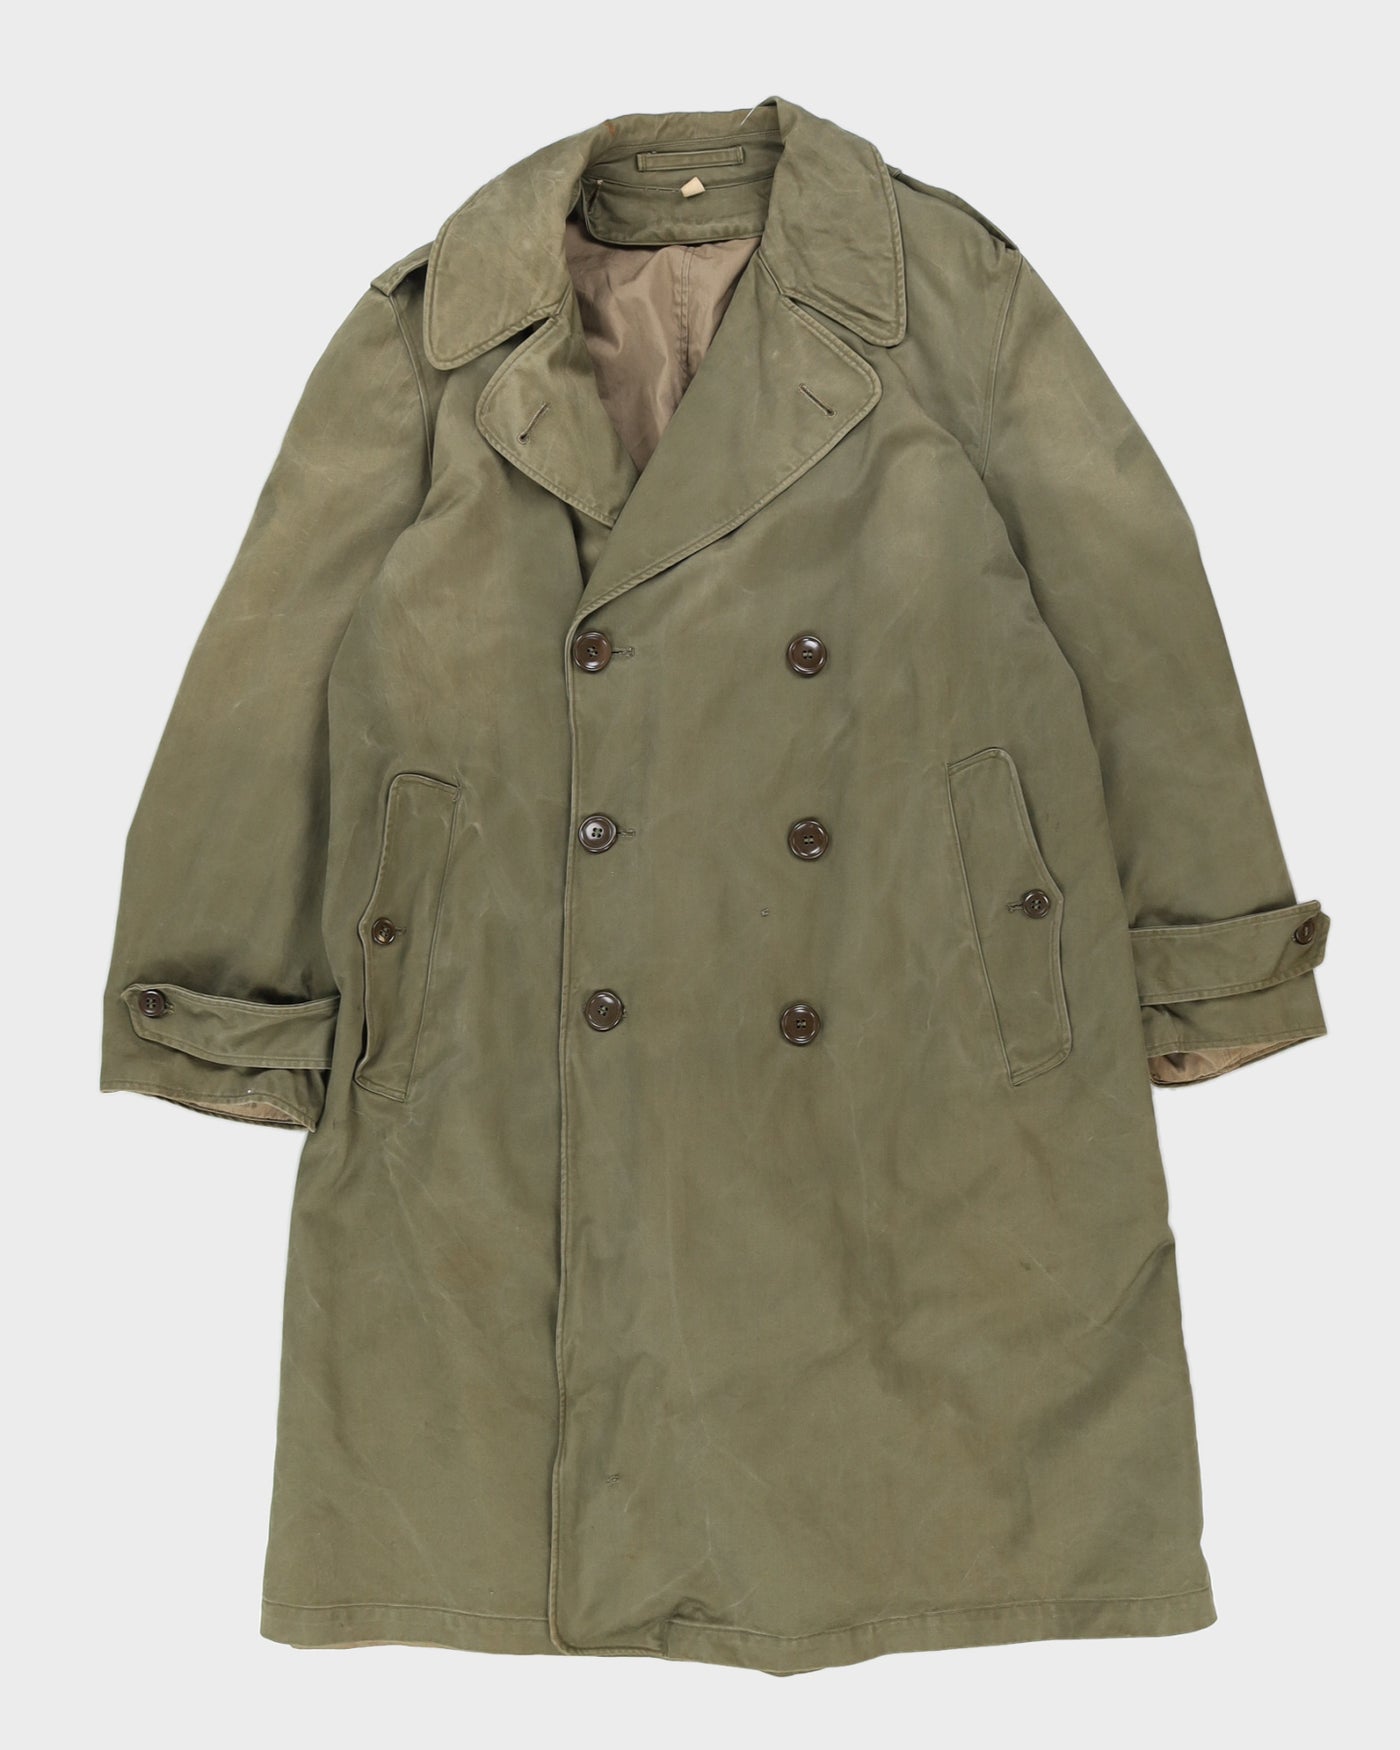 Gucci Classic Double-Breasted Light Trench Coat Military Green